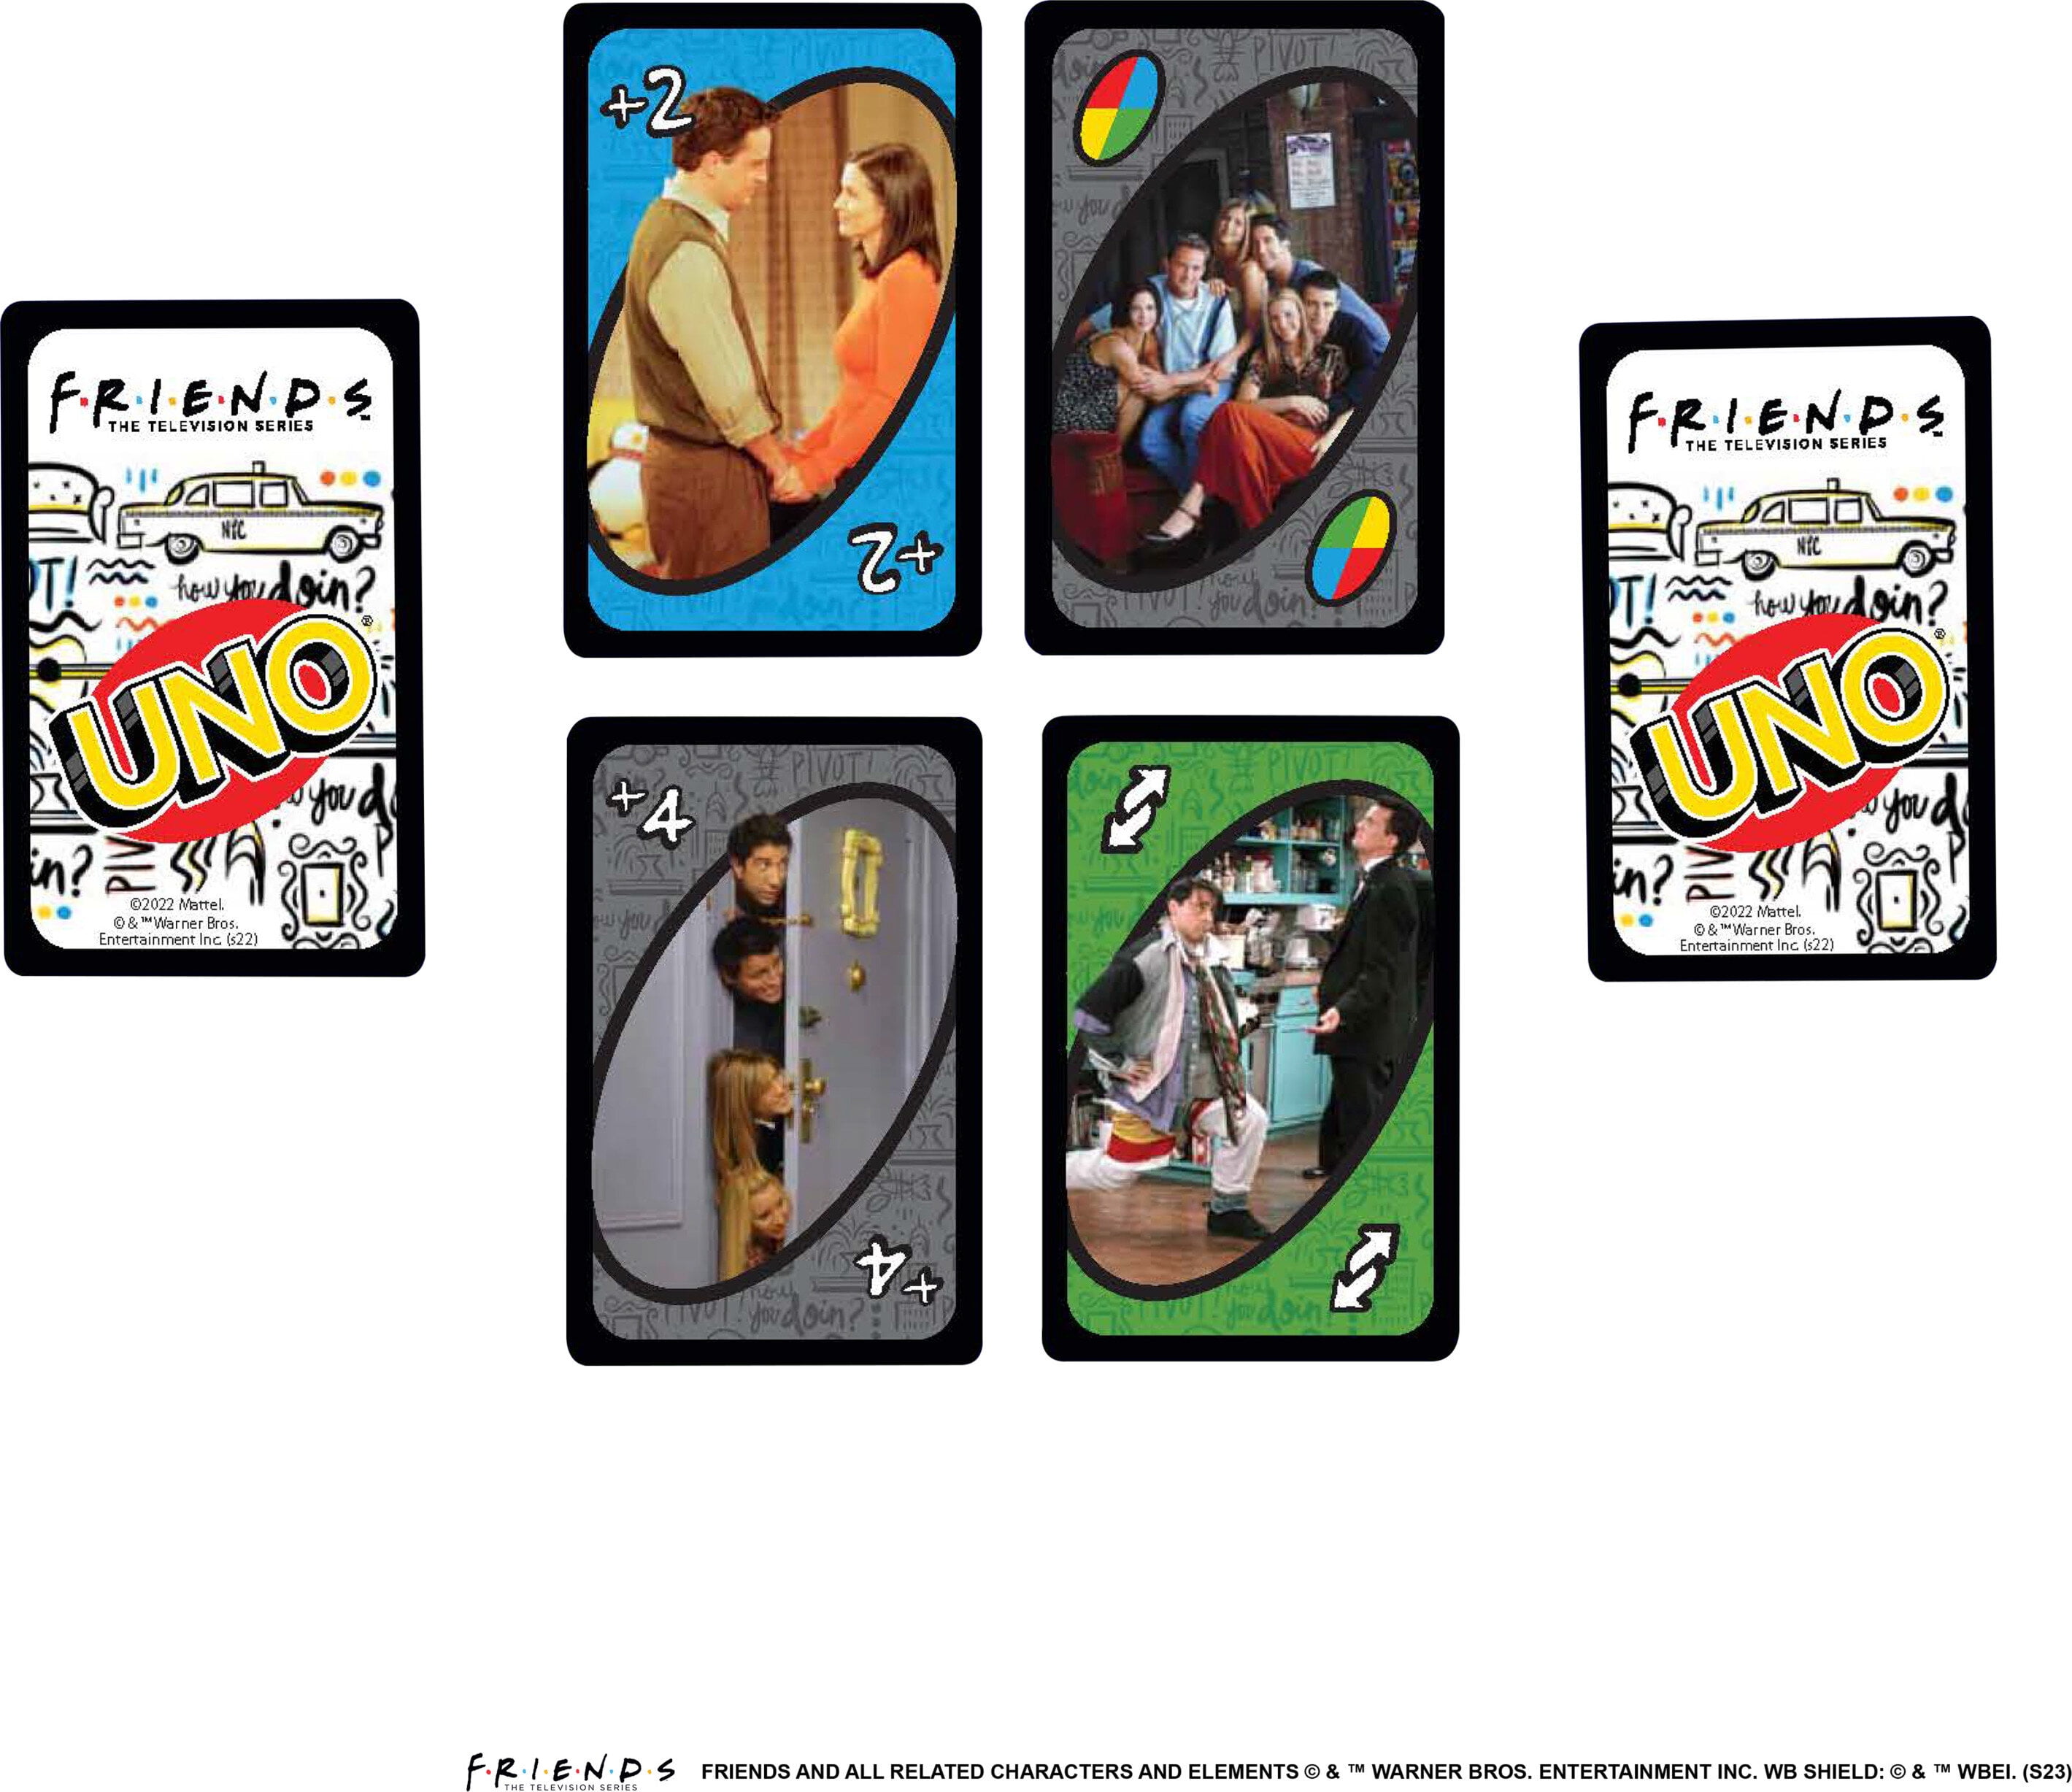 Magically wild. Magically fun. UNO @Disney 100 is now available.